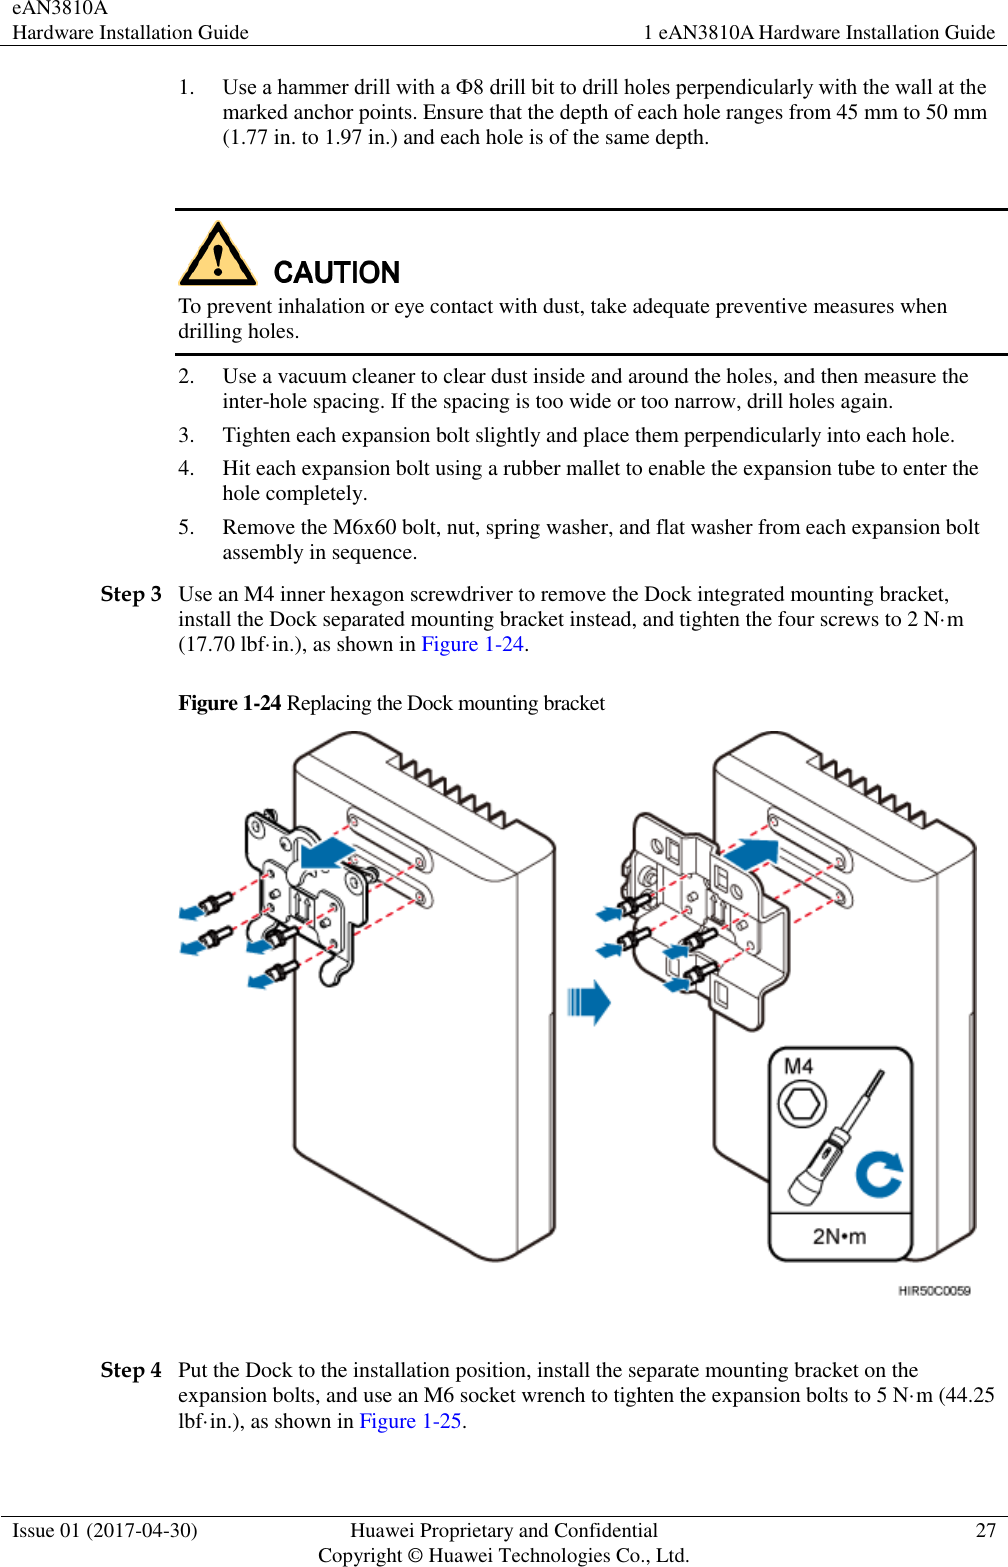 eAN3810A   Hardware Installation Guide 1 eAN3810A Hardware Installation Guide  Issue 01 (2017-04-30) Huawei Proprietary and Confidential                                     Copyright © Huawei Technologies Co., Ltd. 27  1. Use a hammer drill with a Ф8 drill bit to drill holes perpendicularly with the wall at the marked anchor points. Ensure that the depth of each hole ranges from 45 mm to 50 mm (1.77 in. to 1.97 in.) and each hole is of the same depth.   To prevent inhalation or eye contact with dust, take adequate preventive measures when drilling holes.   2. Use a vacuum cleaner to clear dust inside and around the holes, and then measure the inter-hole spacing. If the spacing is too wide or too narrow, drill holes again. 3. Tighten each expansion bolt slightly and place them perpendicularly into each hole. 4. Hit each expansion bolt using a rubber mallet to enable the expansion tube to enter the hole completely. 5. Remove the M6x60 bolt, nut, spring washer, and flat washer from each expansion bolt assembly in sequence. Step 3 Use an M4 inner hexagon screwdriver to remove the Dock integrated mounting bracket, install the Dock separated mounting bracket instead, and tighten the four screws to 2 N·m (17.70 lbf·in.), as shown in Figure 1-24. Figure 1-24 Replacing the Dock mounting bracket   Step 4 Put the Dock to the installation position, install the separate mounting bracket on the expansion bolts, and use an M6 socket wrench to tighten the expansion bolts to 5 N·m (44.25 lbf·in.), as shown in Figure 1-25. 